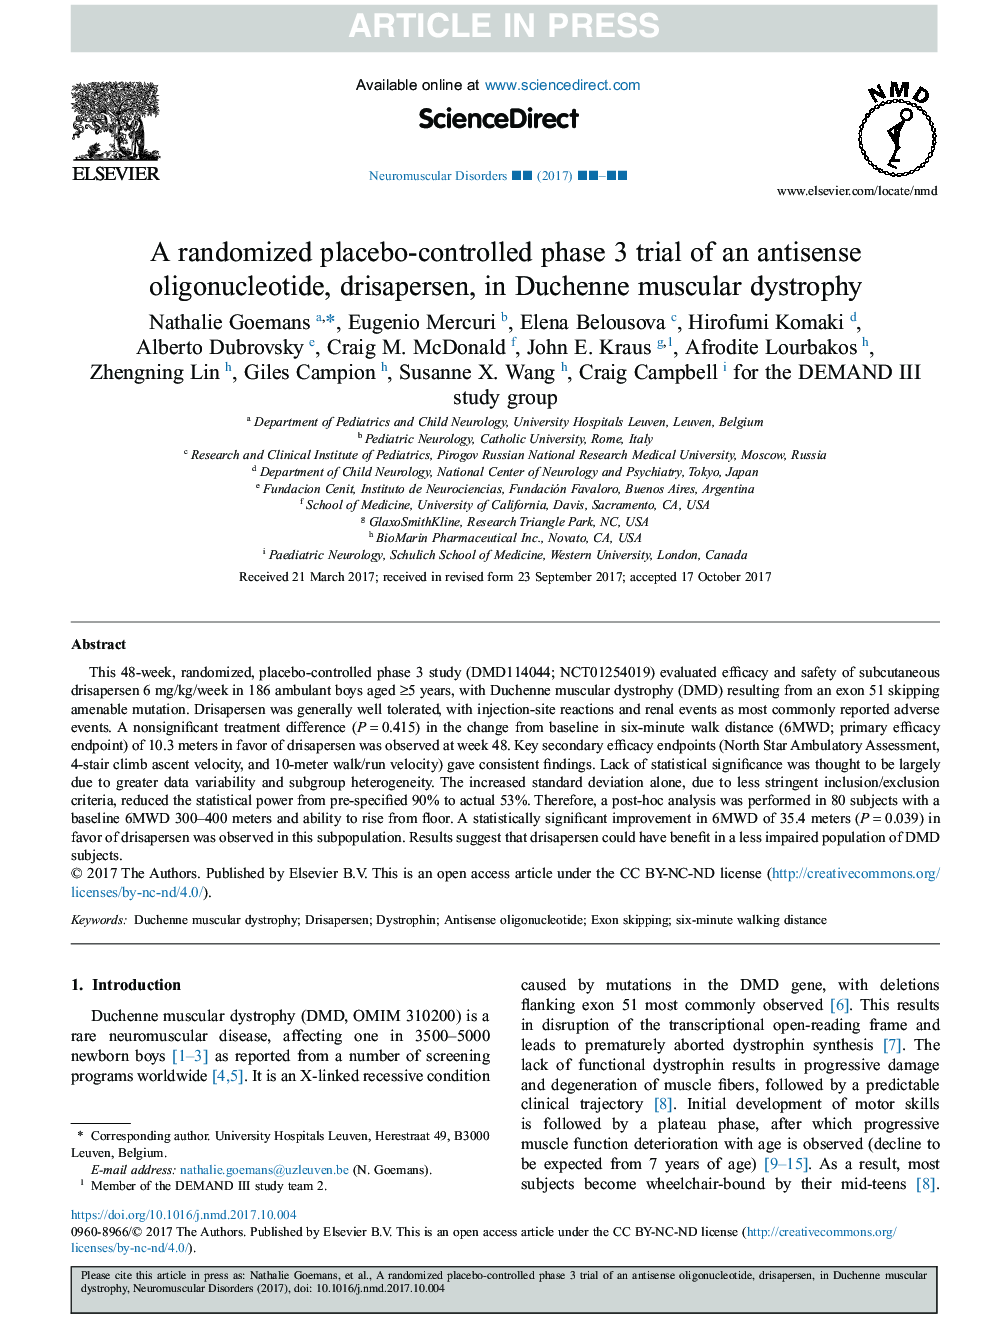 A randomized placebo-controlled phase 3 trial of an antisense oligonucleotide, drisapersen, in Duchenne muscular dystrophy